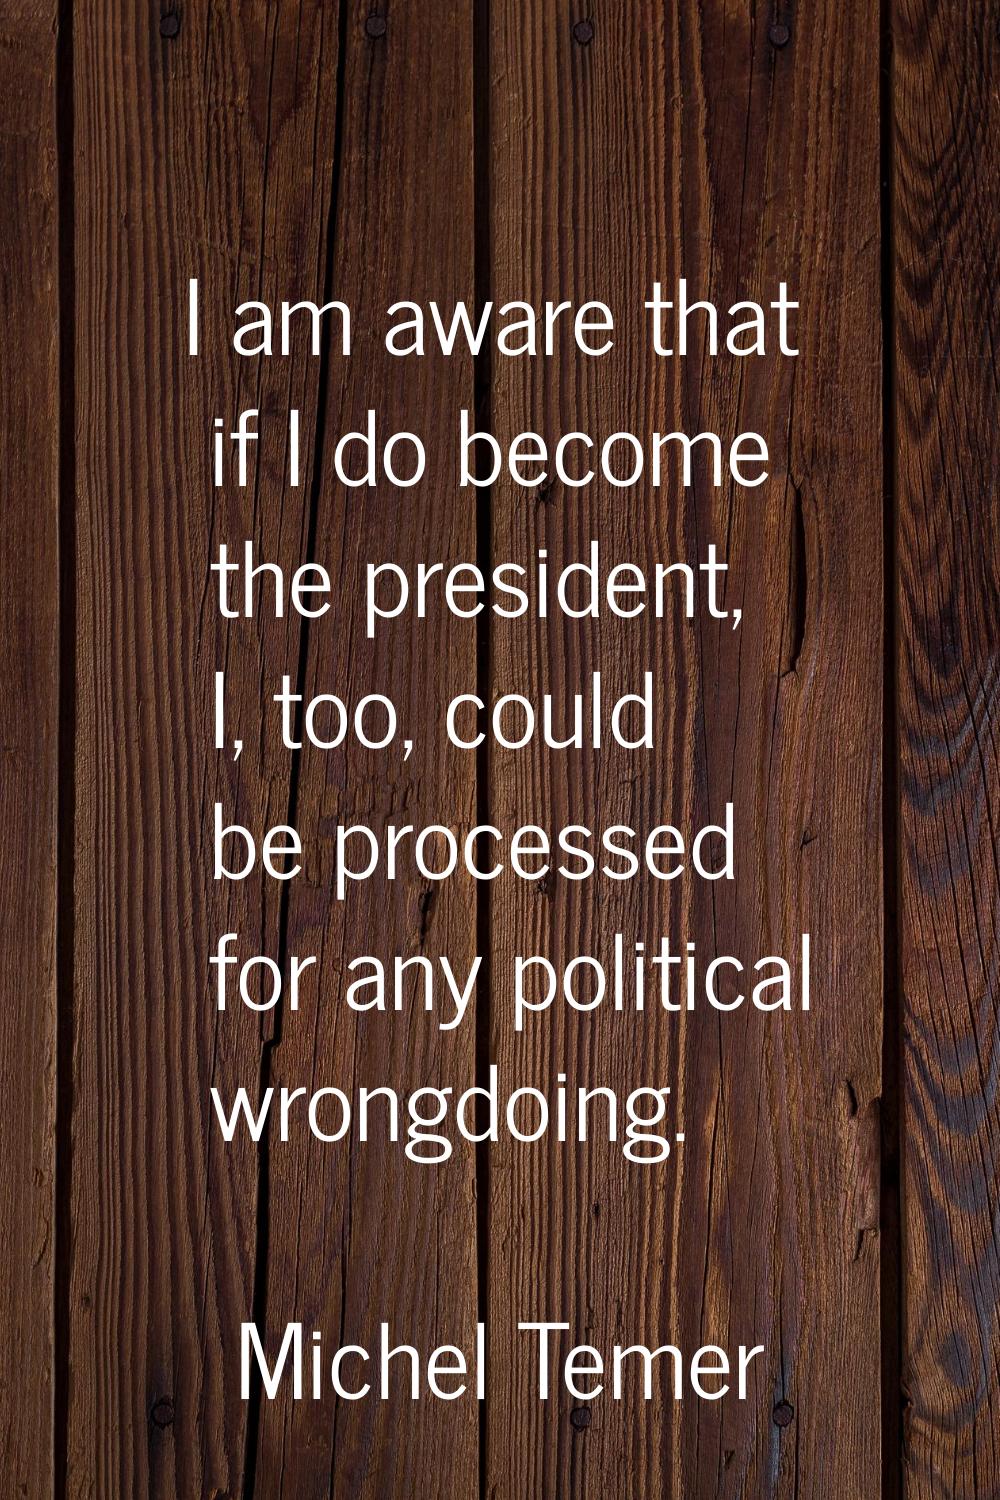 I am aware that if I do become the president, I, too, could be processed for any political wrongdoi